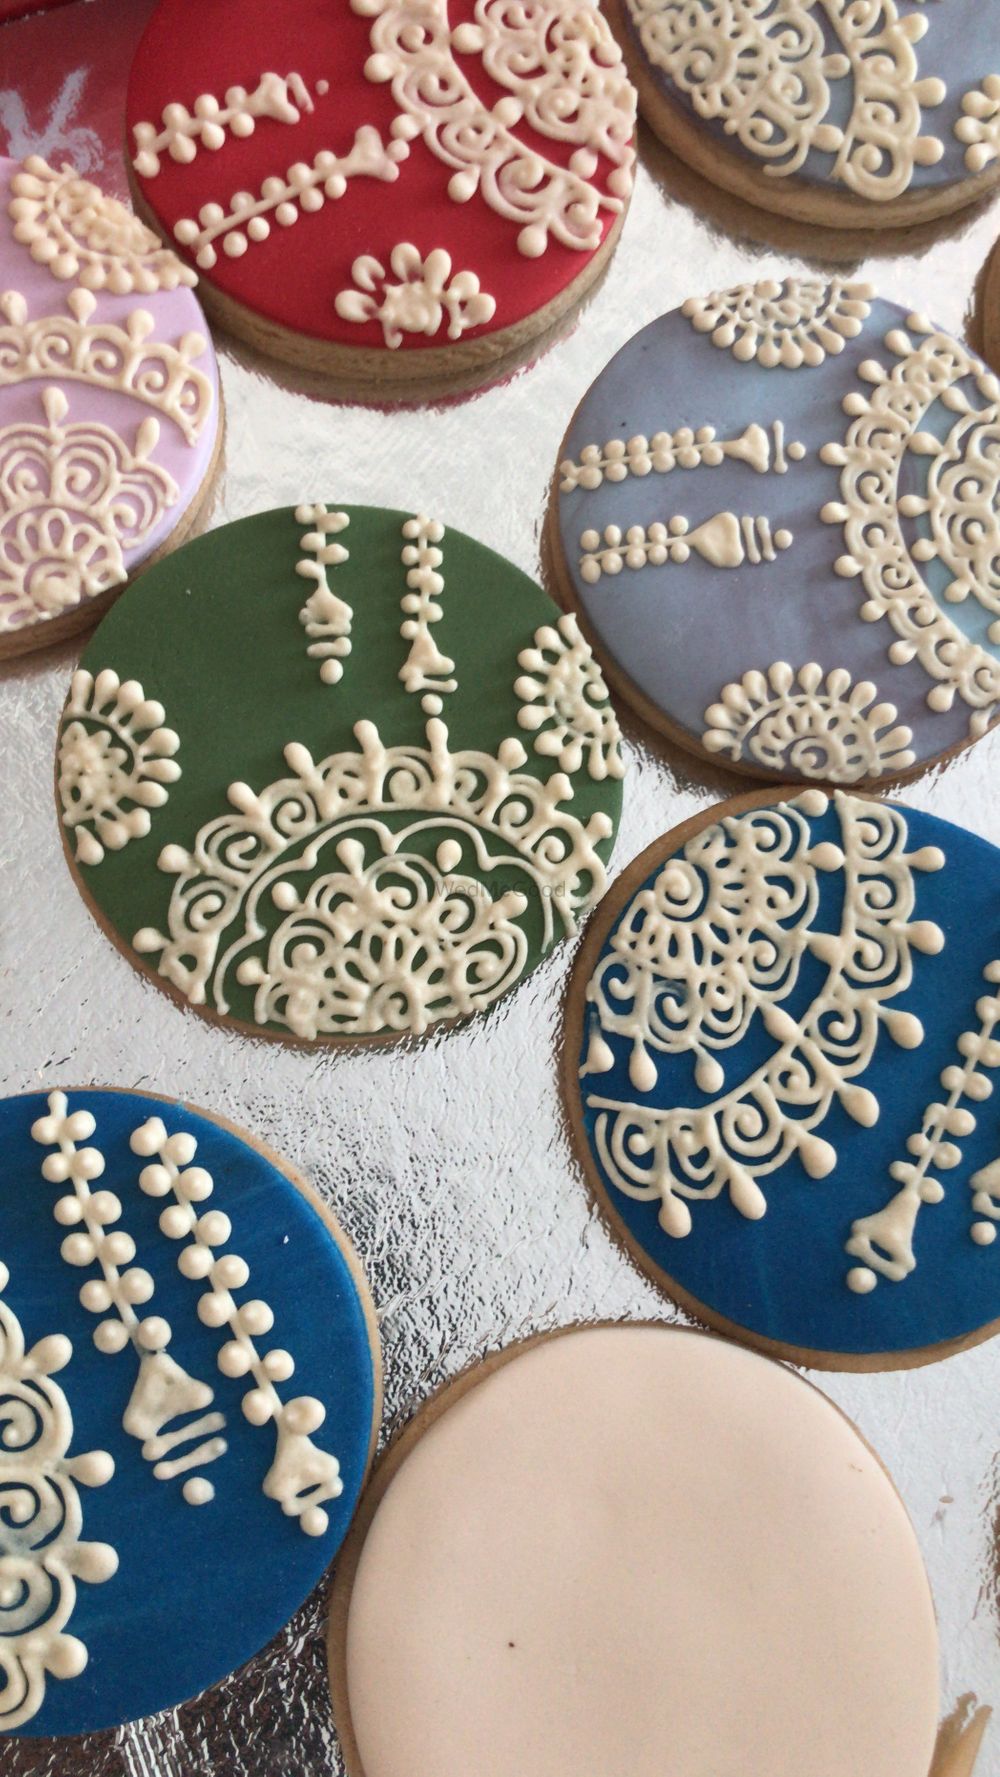 Photo From Zardozi Cookies - By The Great Baking Co.